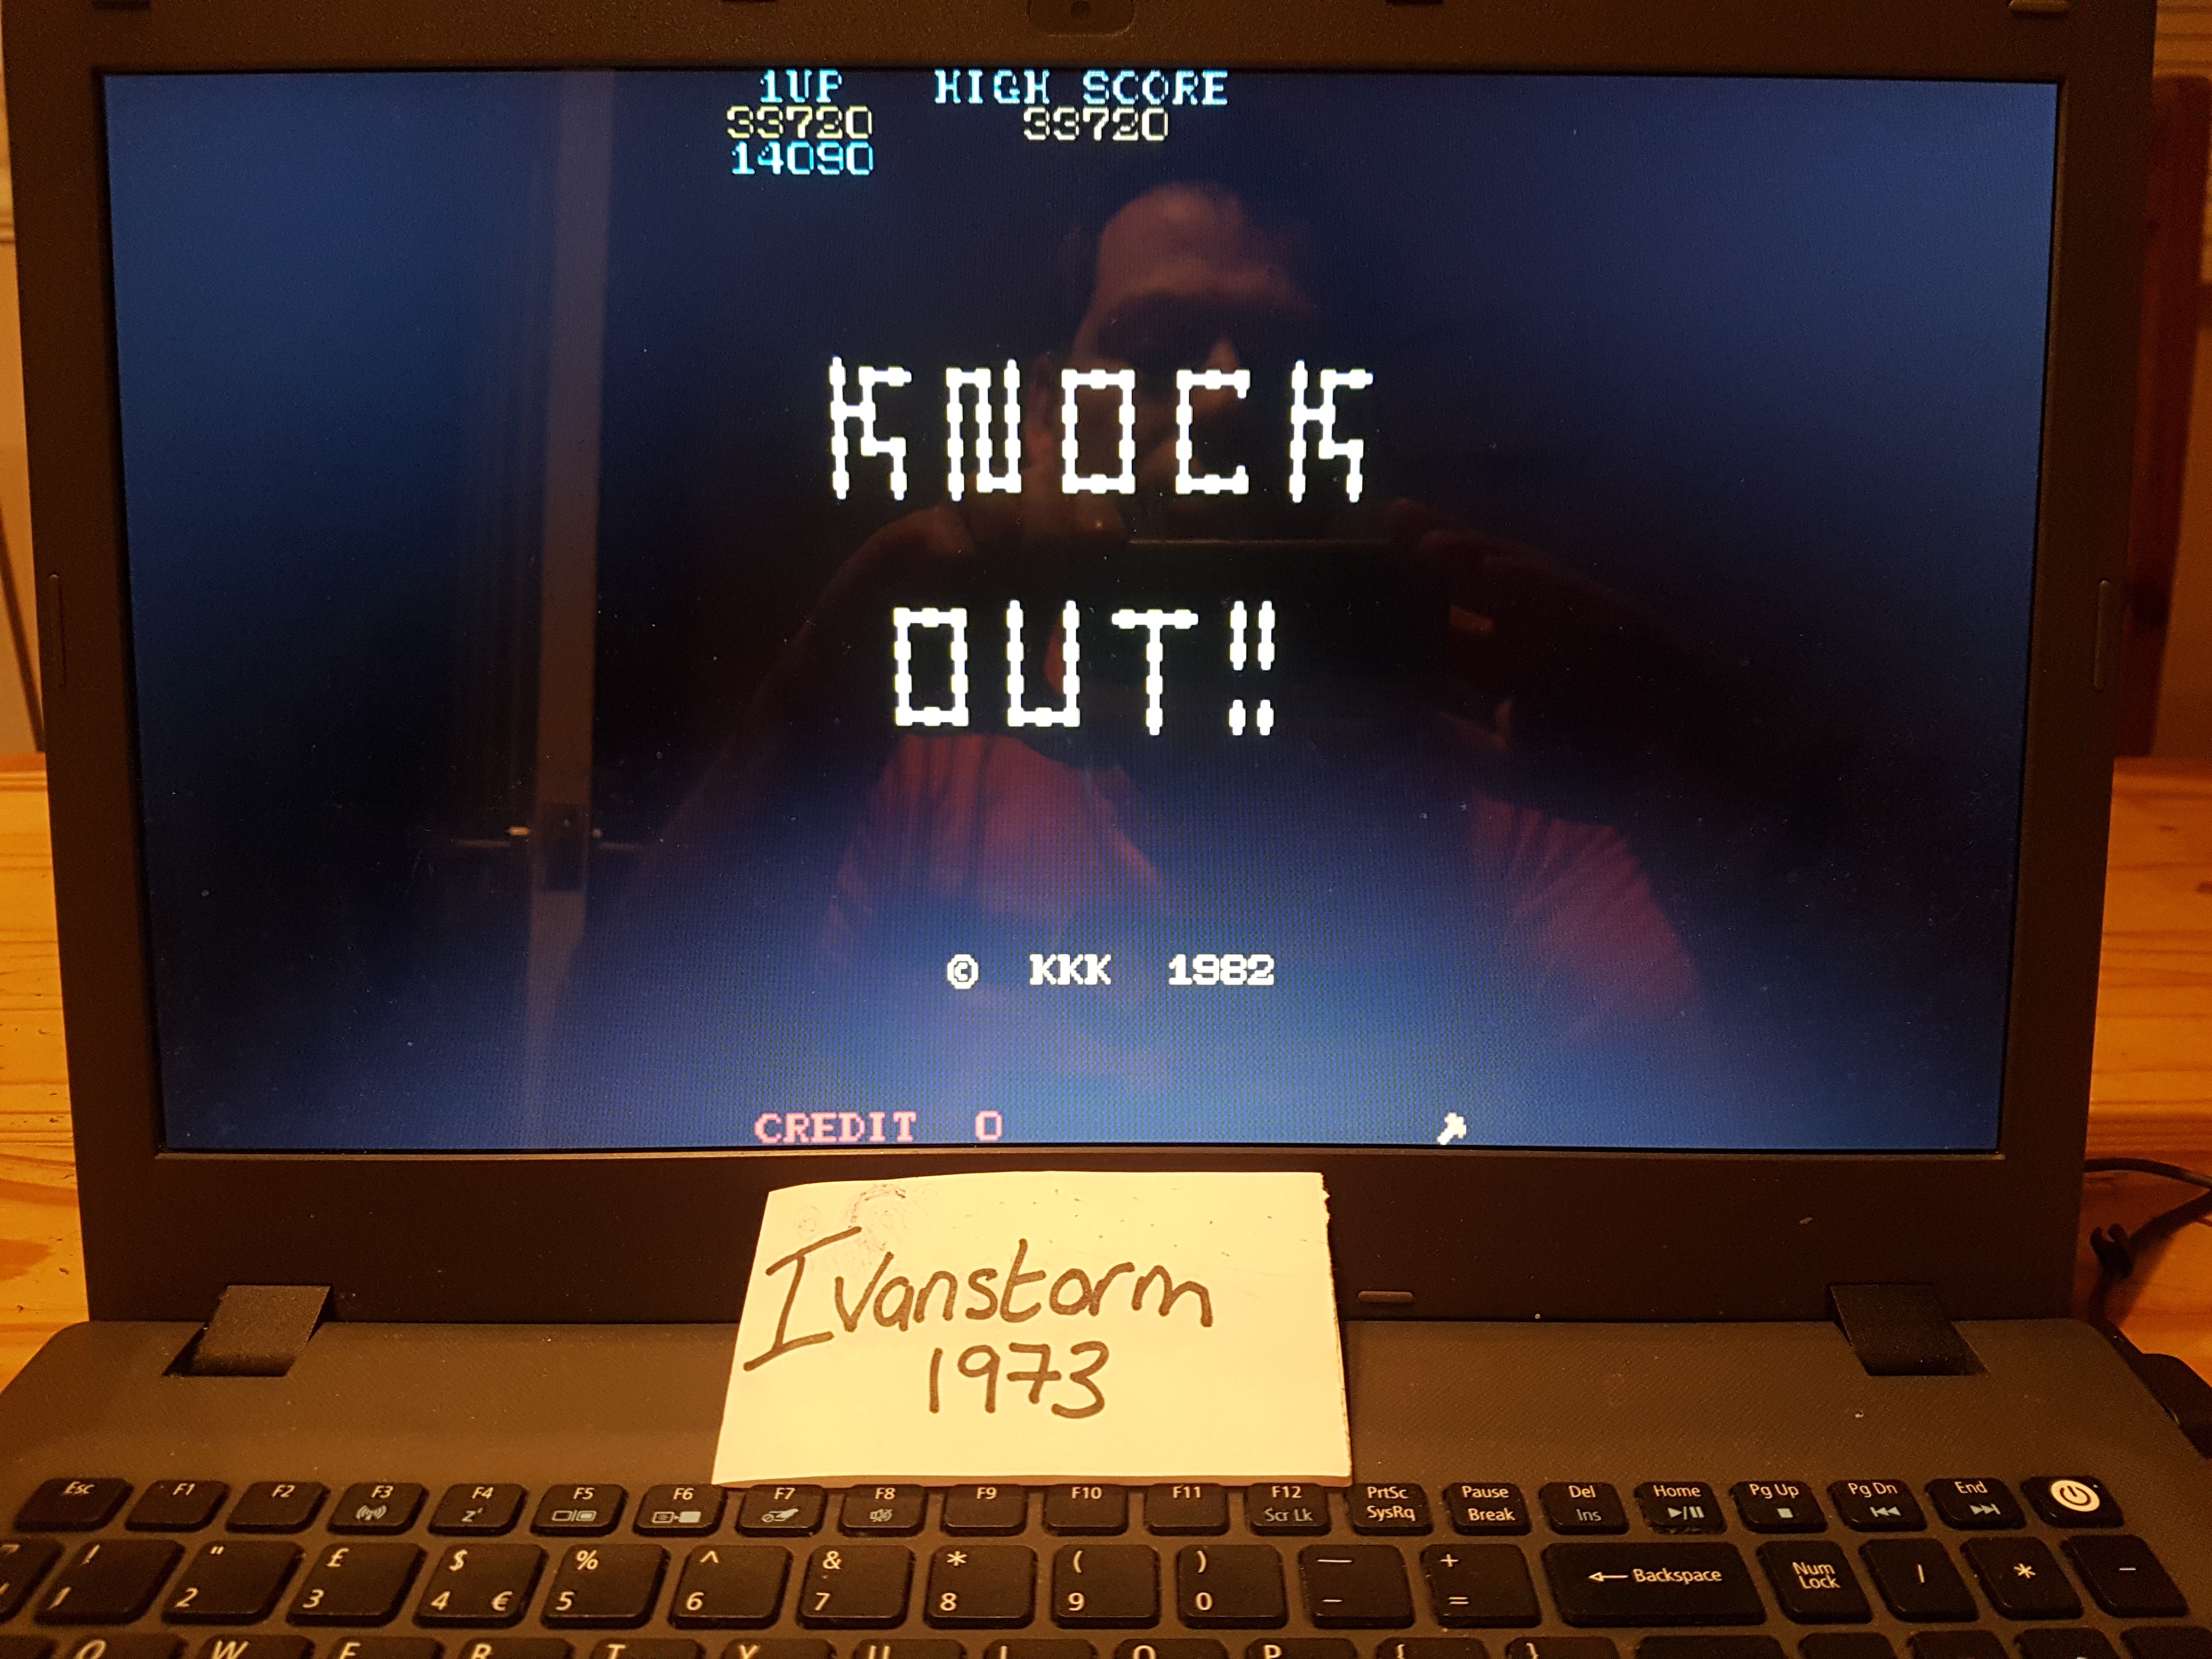 Ivanstorm1973: Knock Out [knockout] (Arcade Emulated / M.A.M.E.) 33,720 points on 2018-03-13 14:46:29